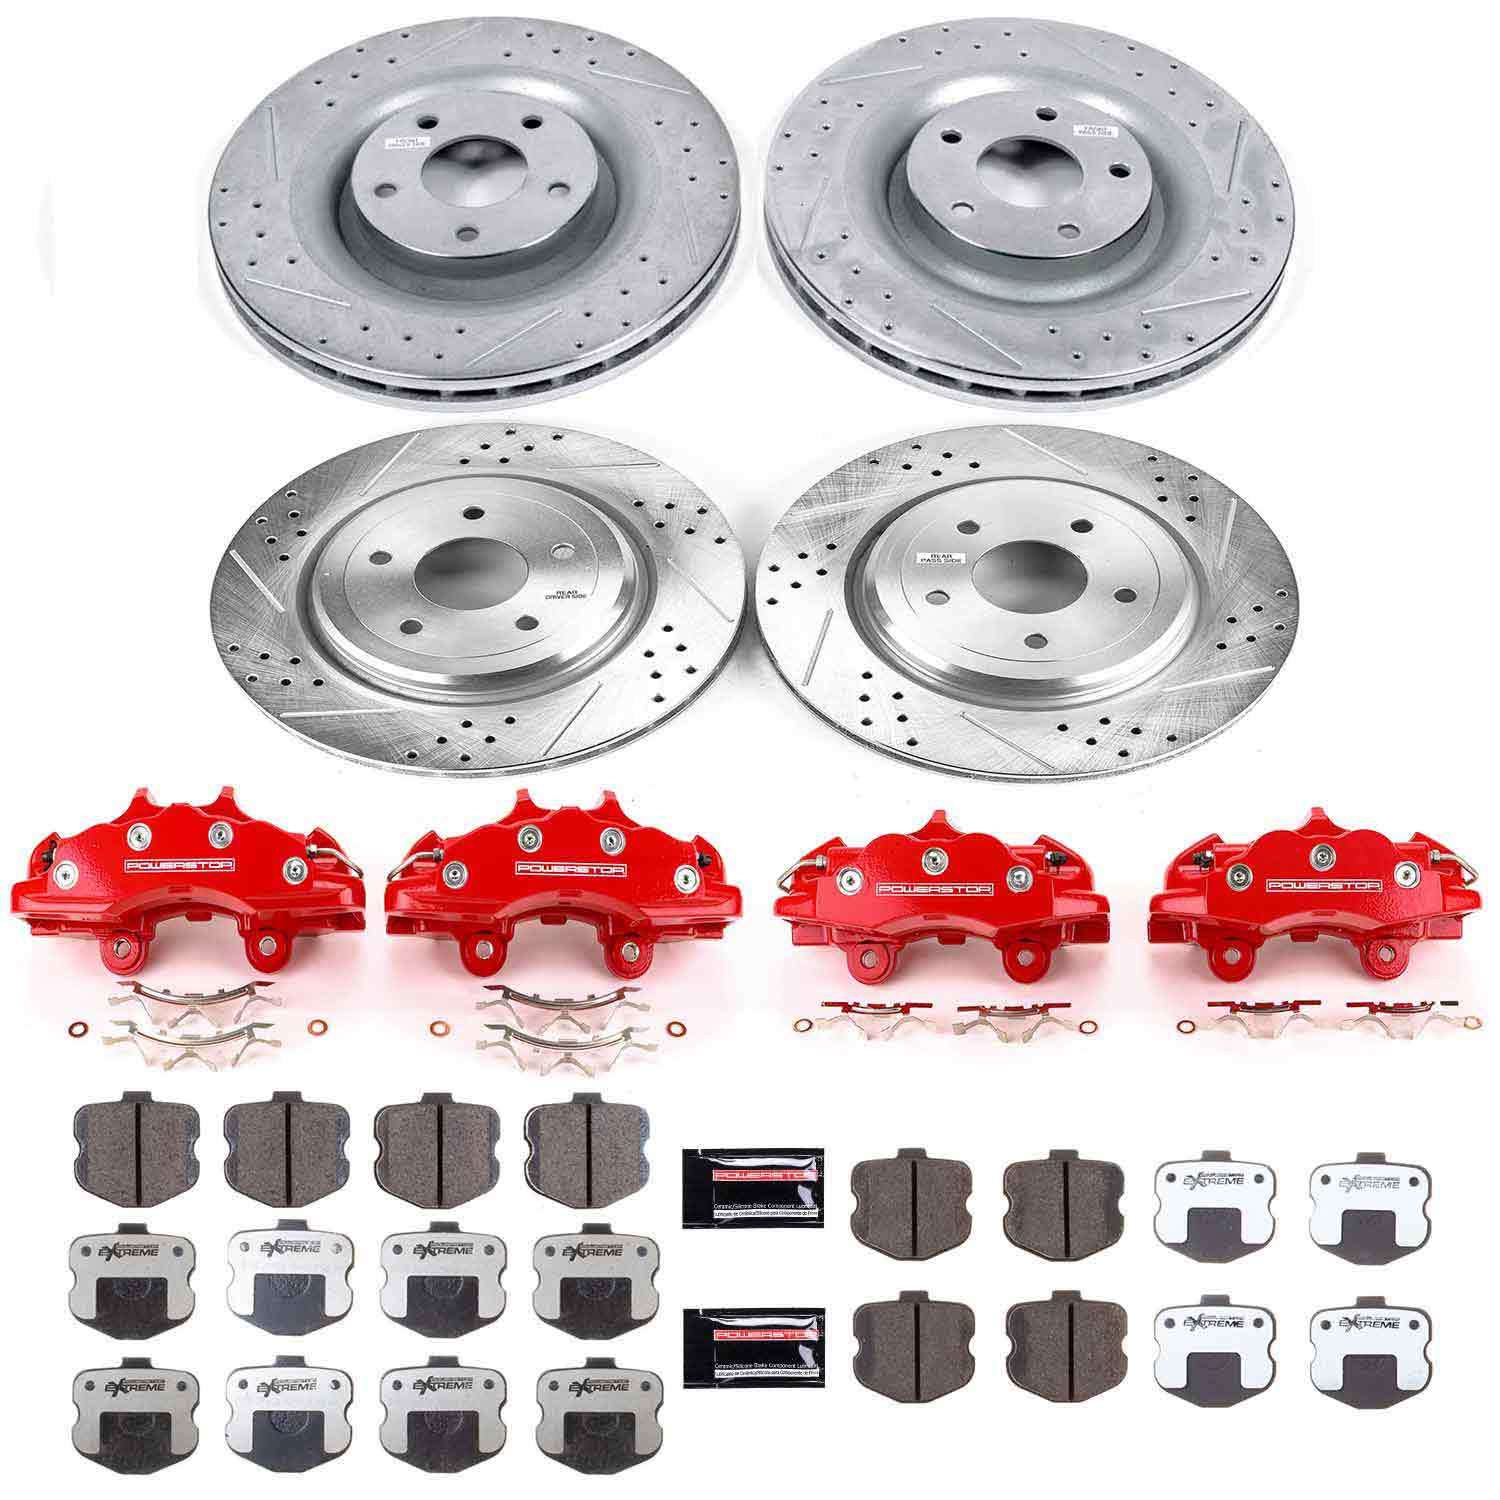 PowerStop Z26 Street Warrior Brake Kit with Calipers for High-Horsepower Muscle Cars